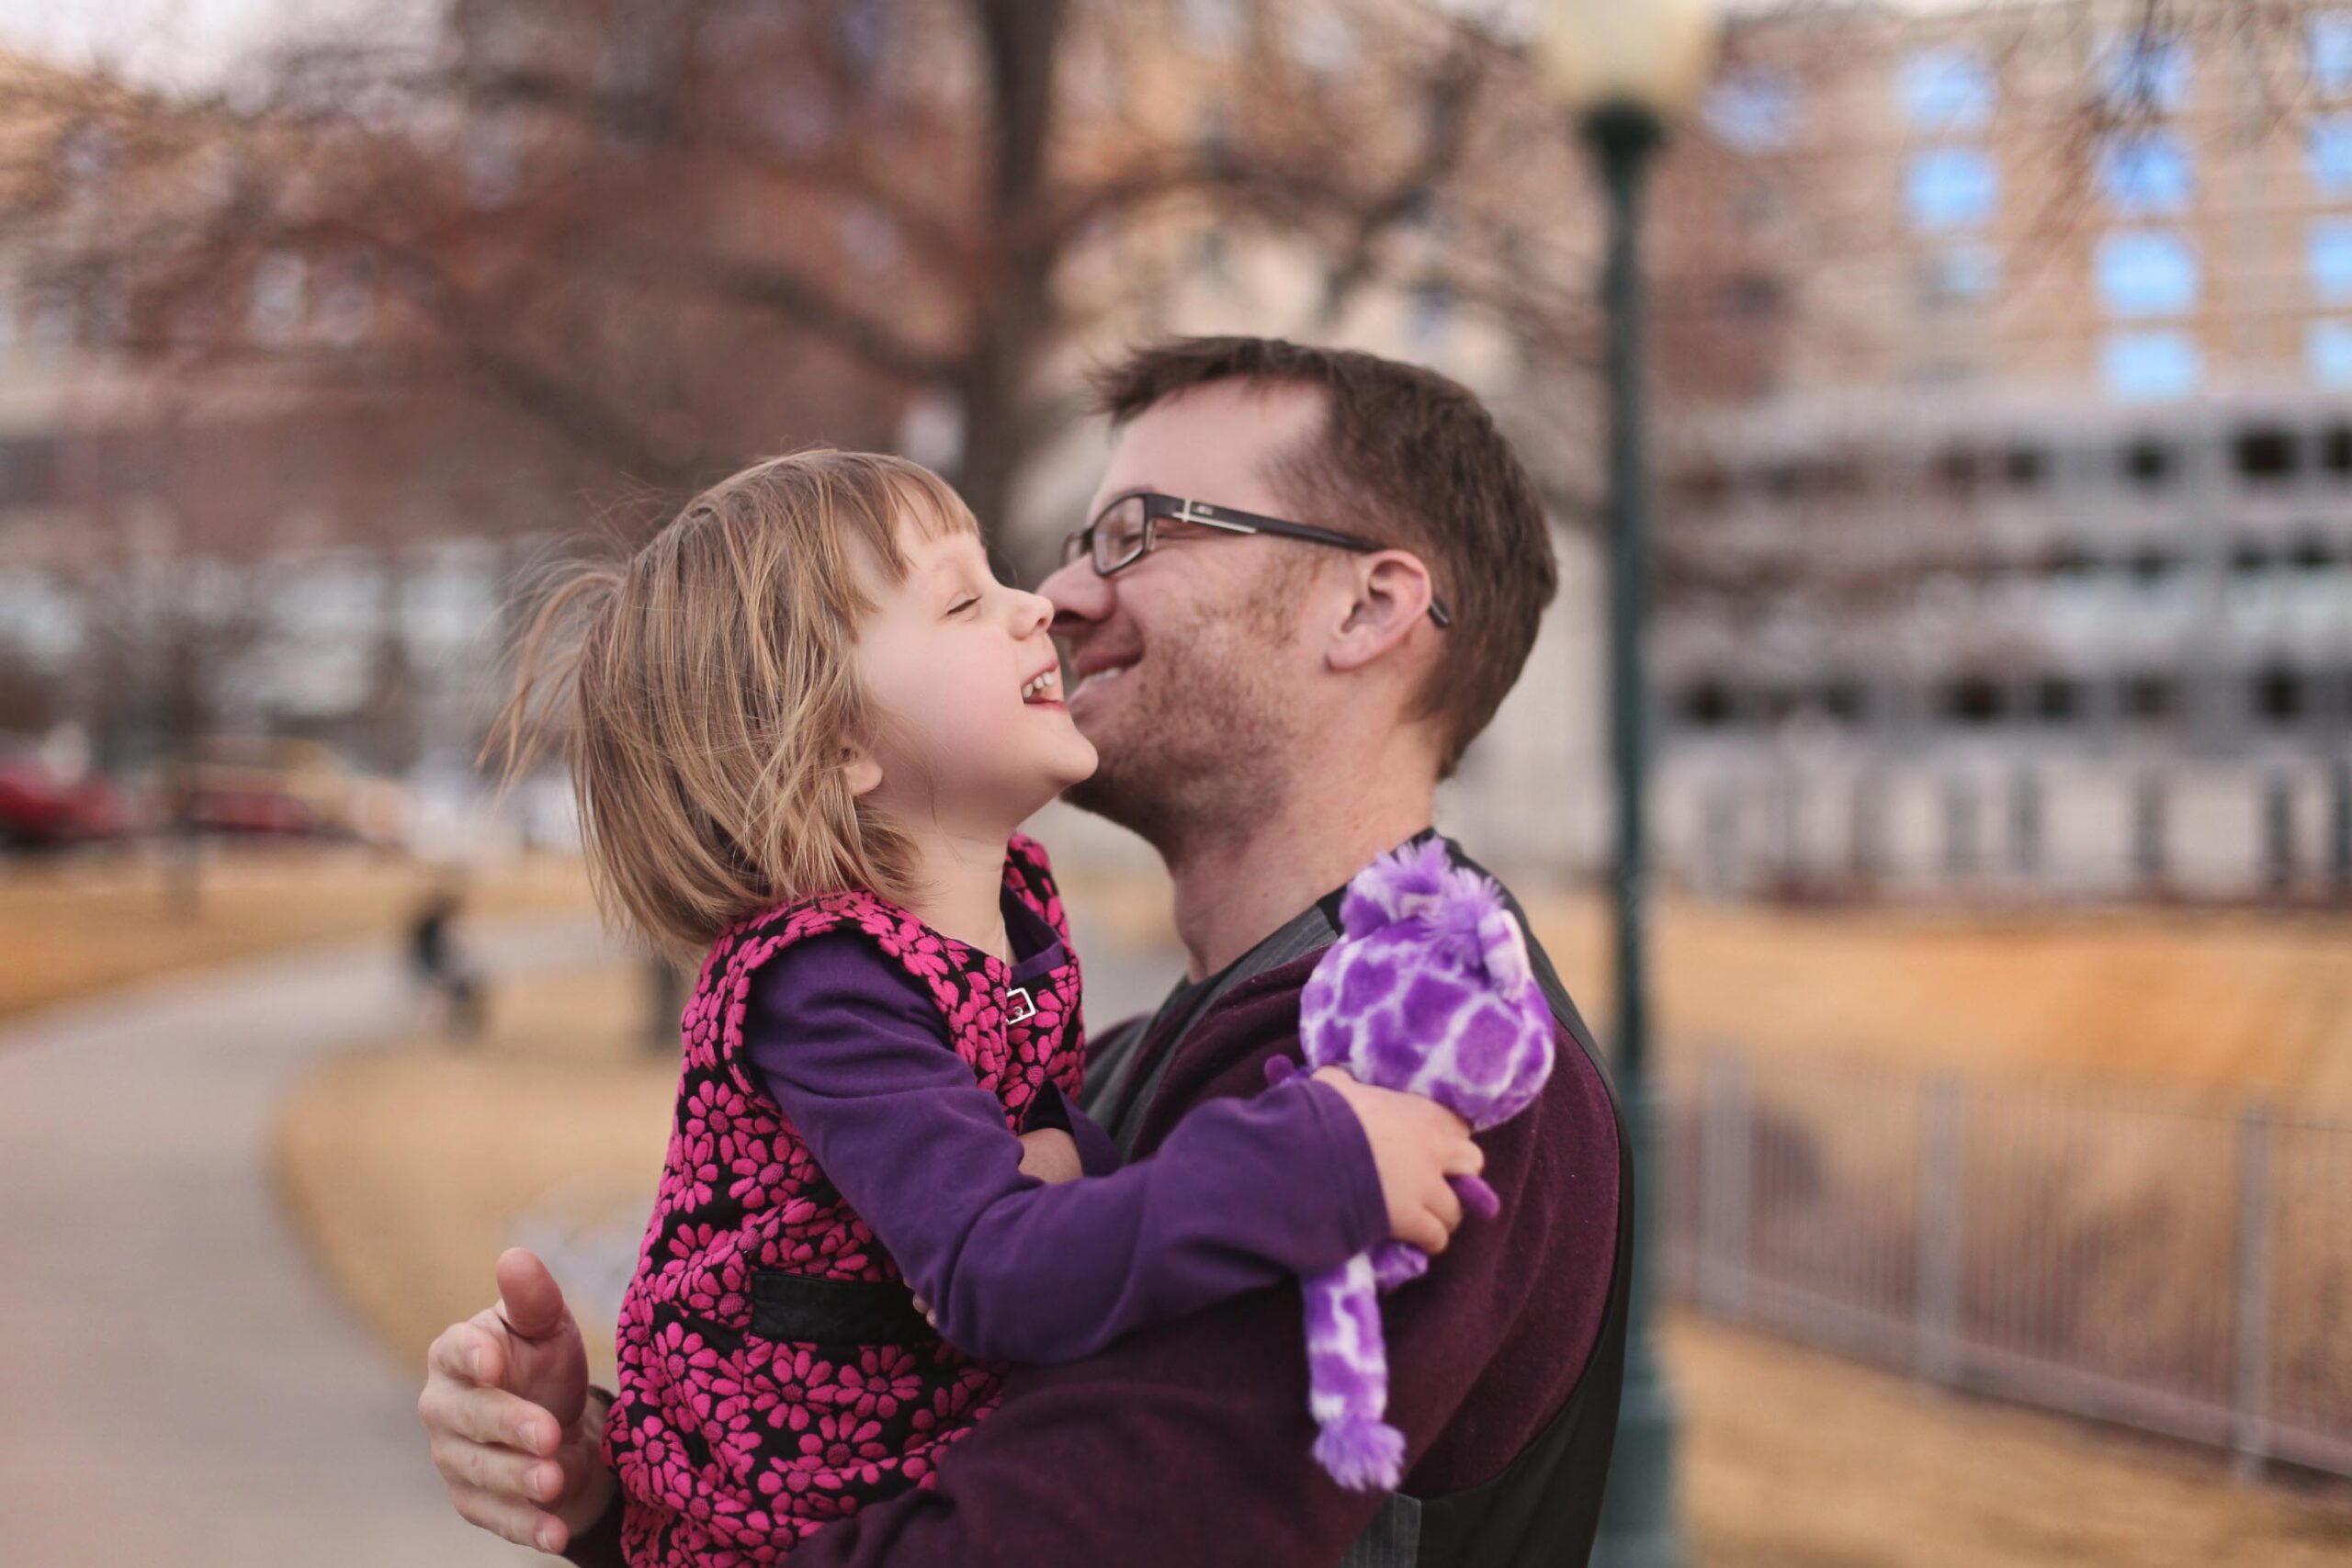 Smiling dad holding laughing young girl outdoors